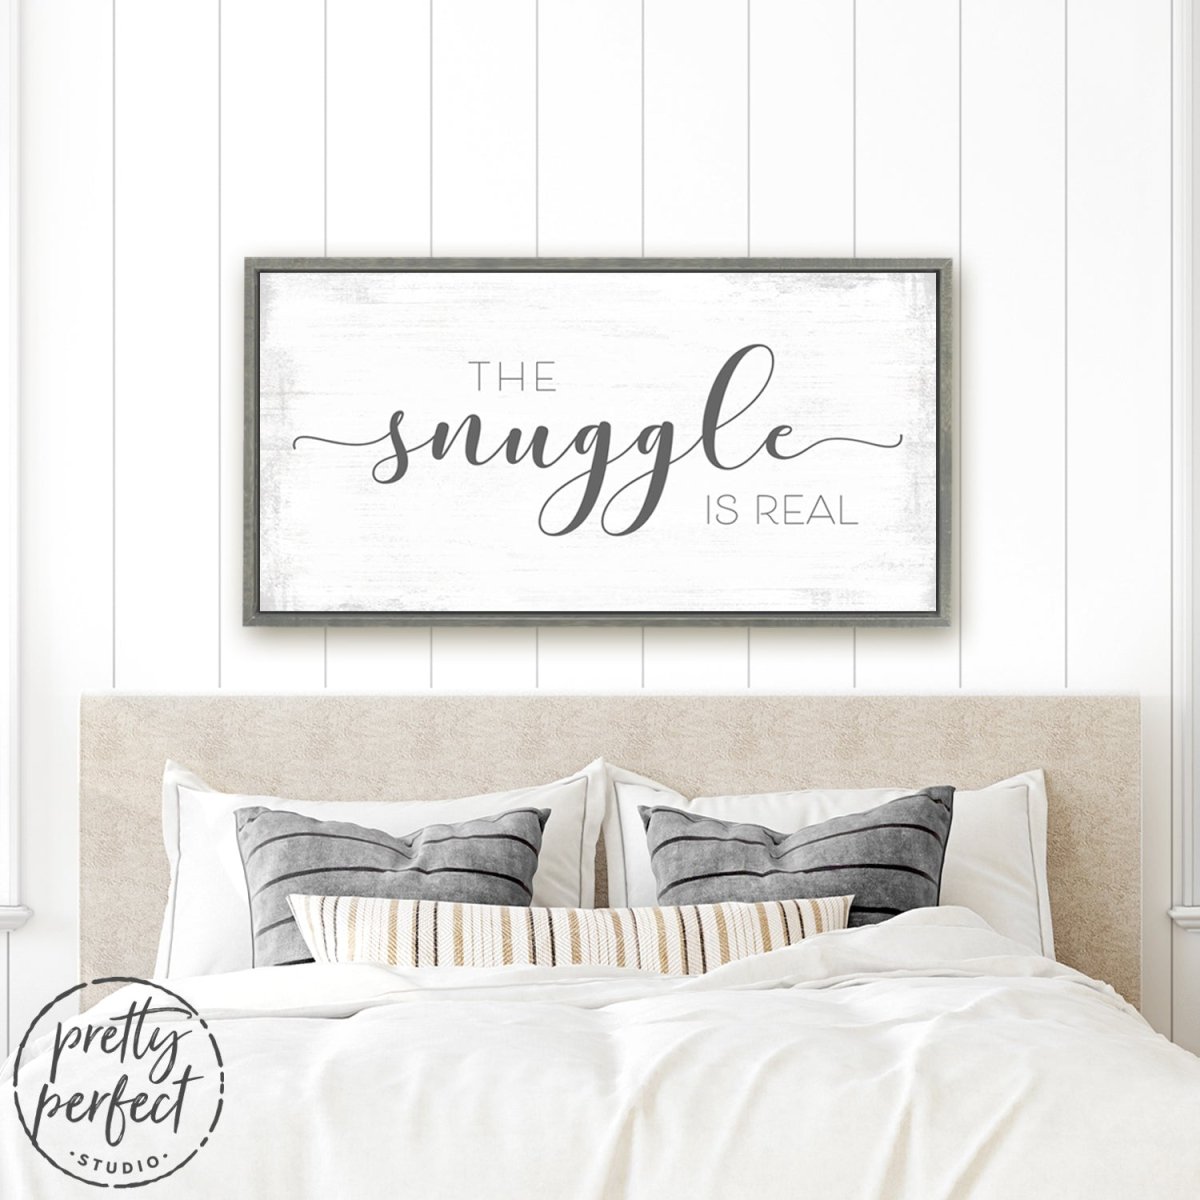 The Snuggle Is Real Sign in Bedroom Above Bed - Pretty Perfect Studio